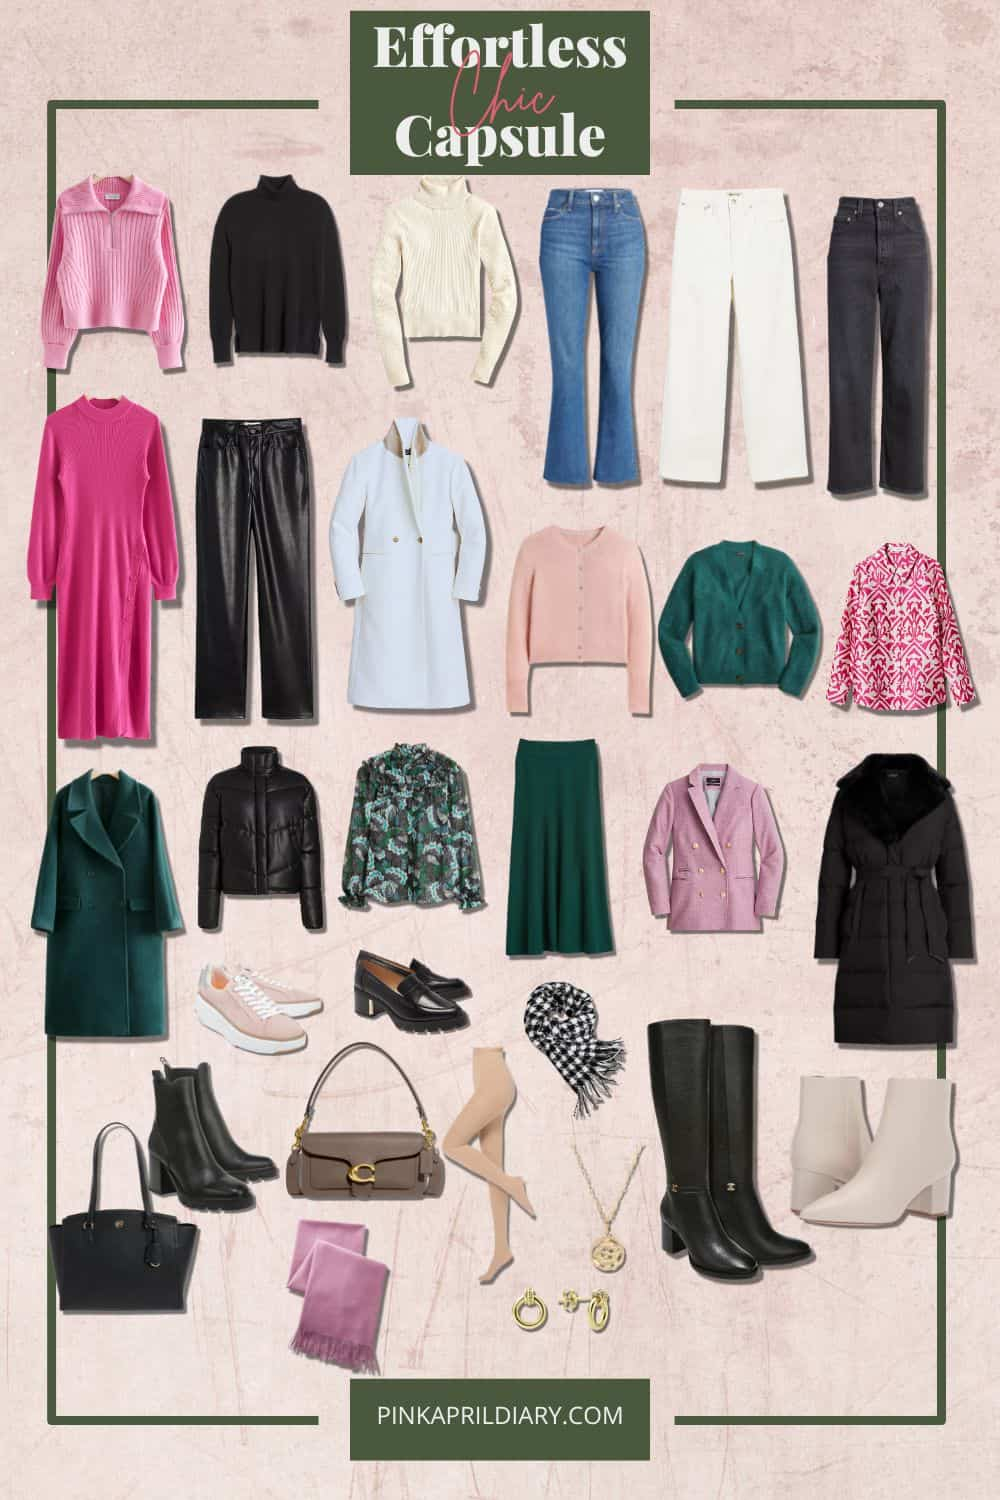 Complete Effortless and Chic Winter Capsule Wardrobe Plan